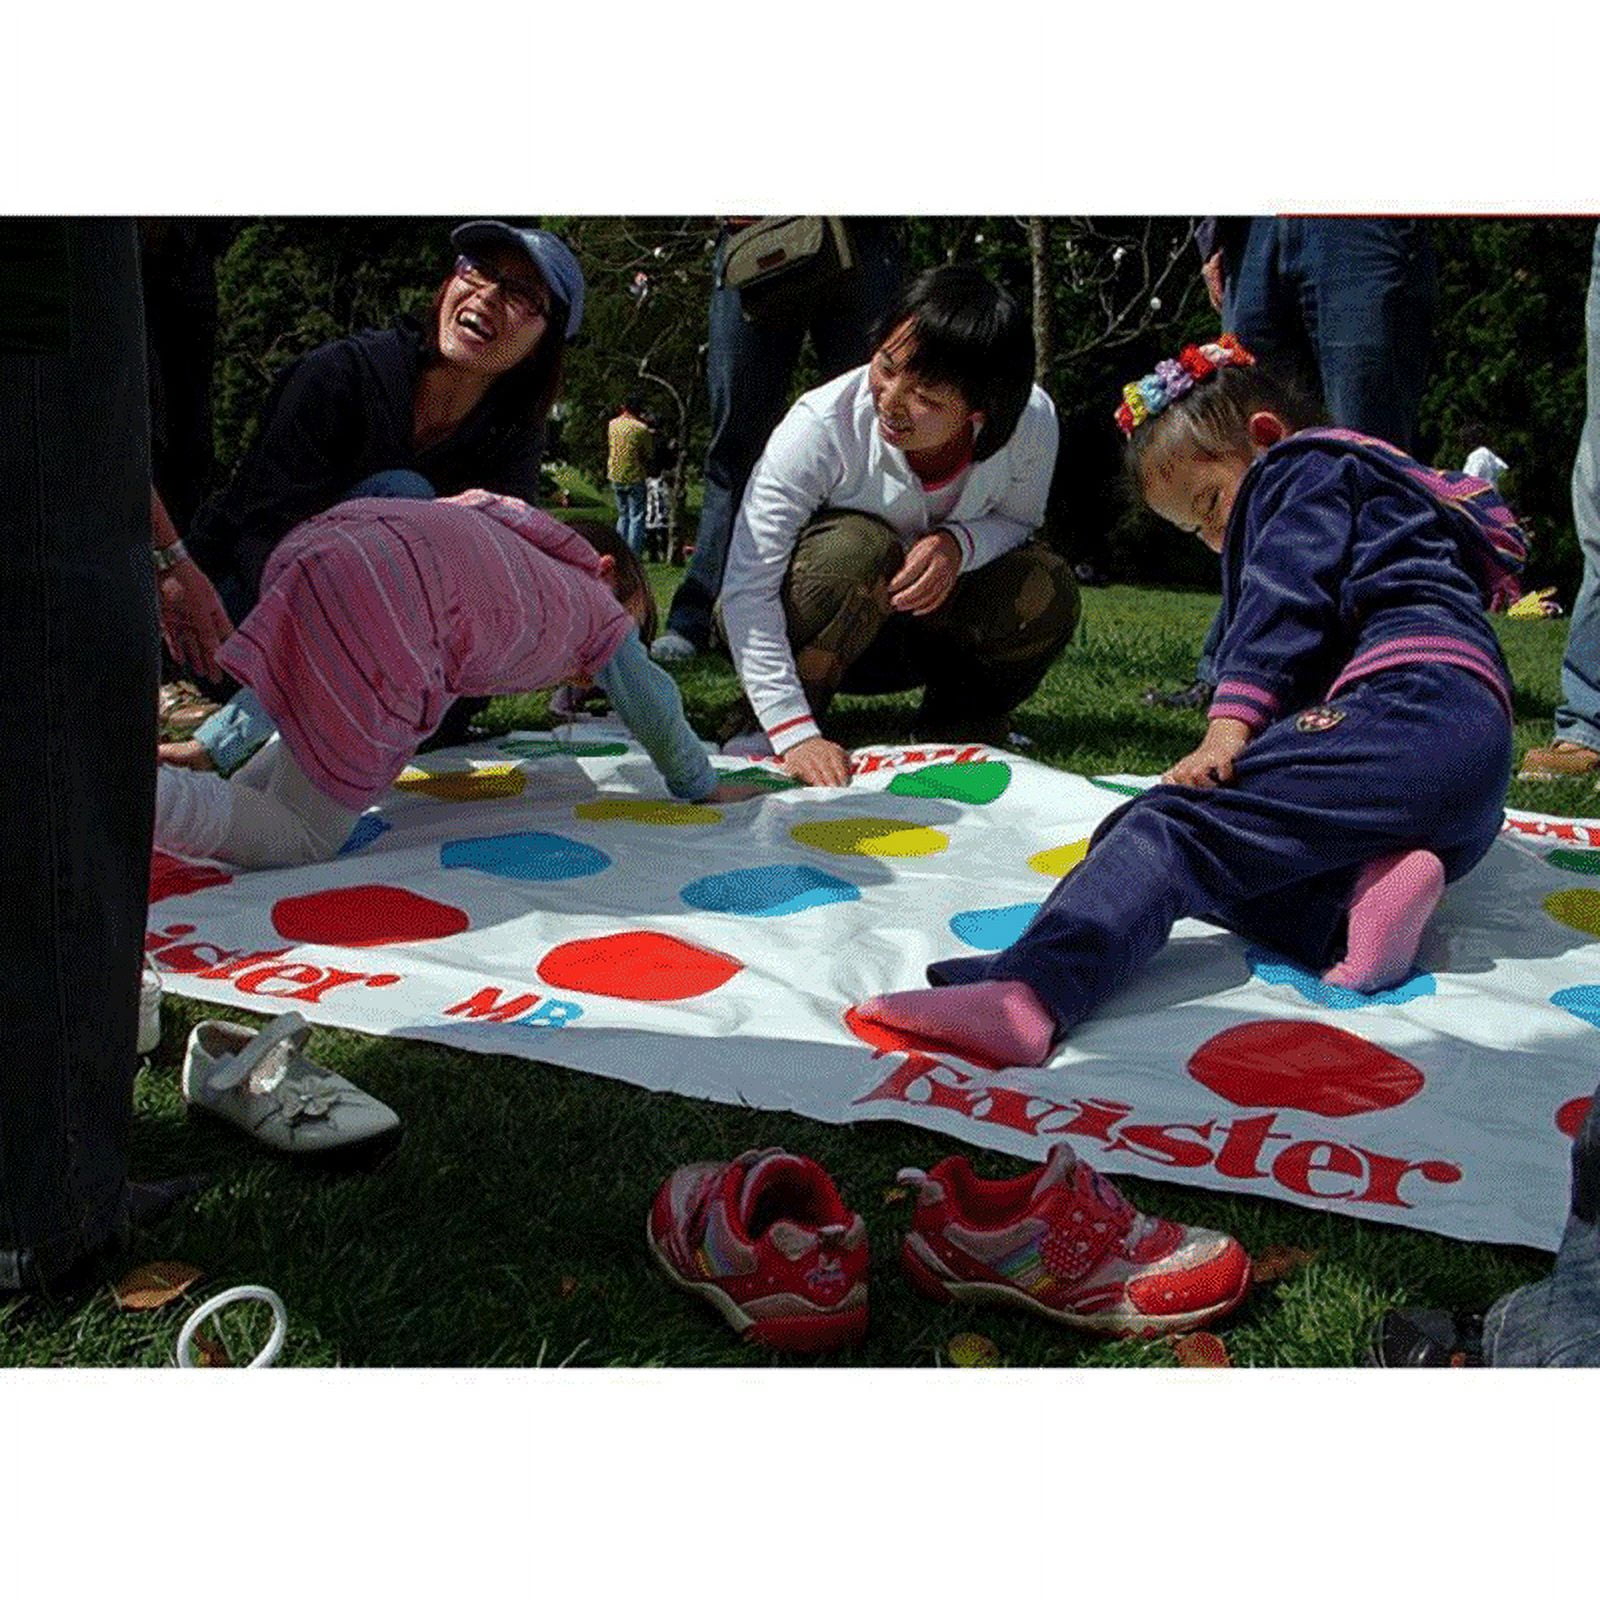 Twists on Fun Games for Outdoor Play - ThinkTV